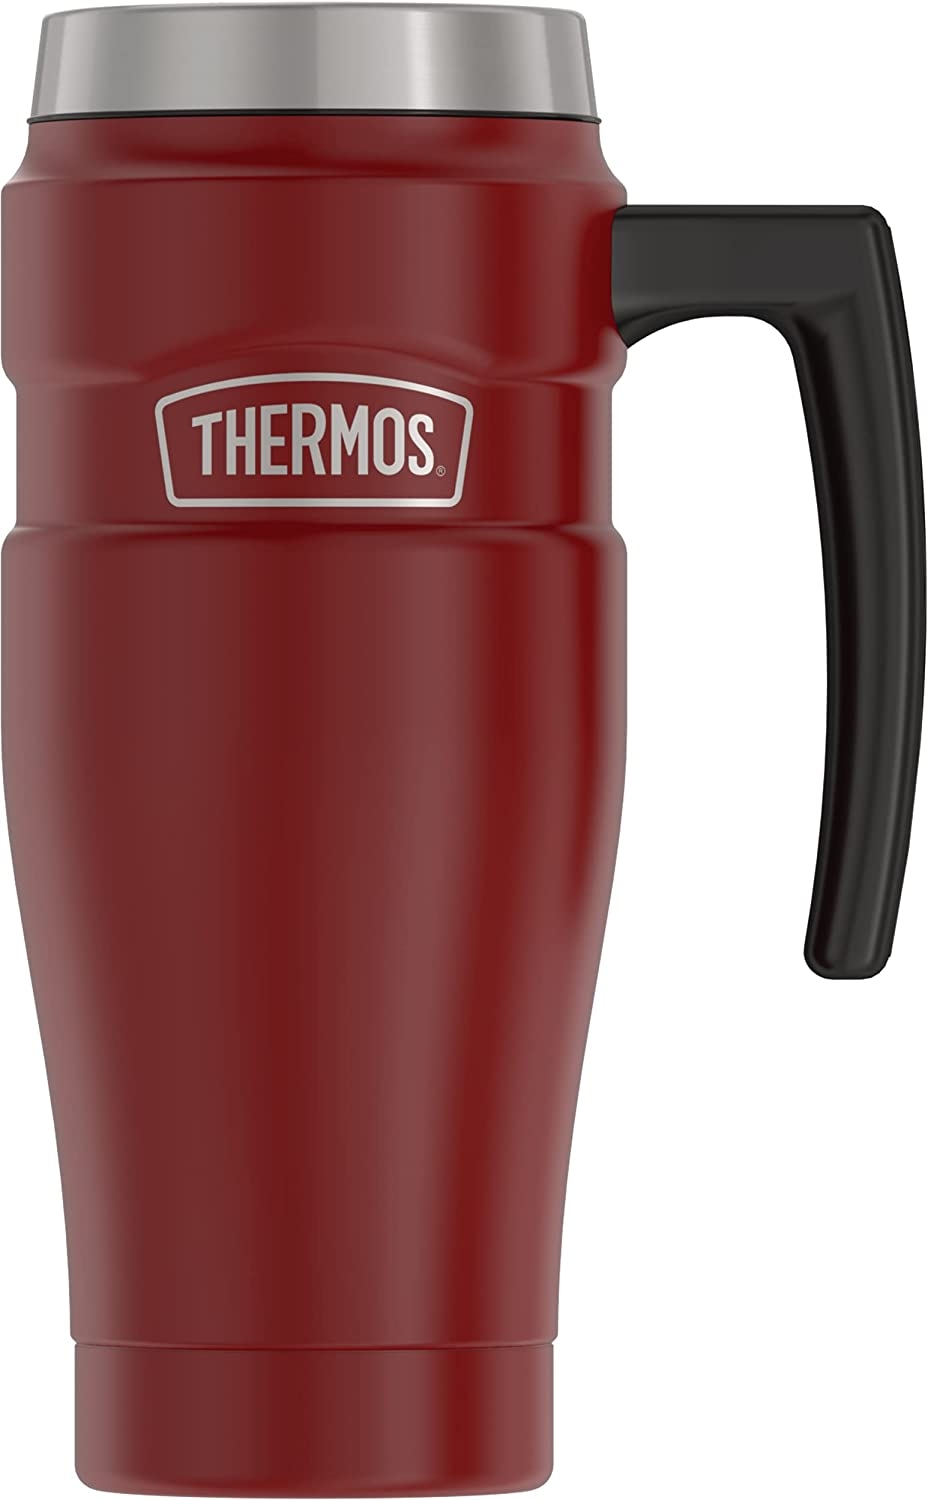 THERMOS Stainless King Vacuum-Insulated Travel Mug, 16 Ounce, Matte Blue Import To Shop ×Product customization General